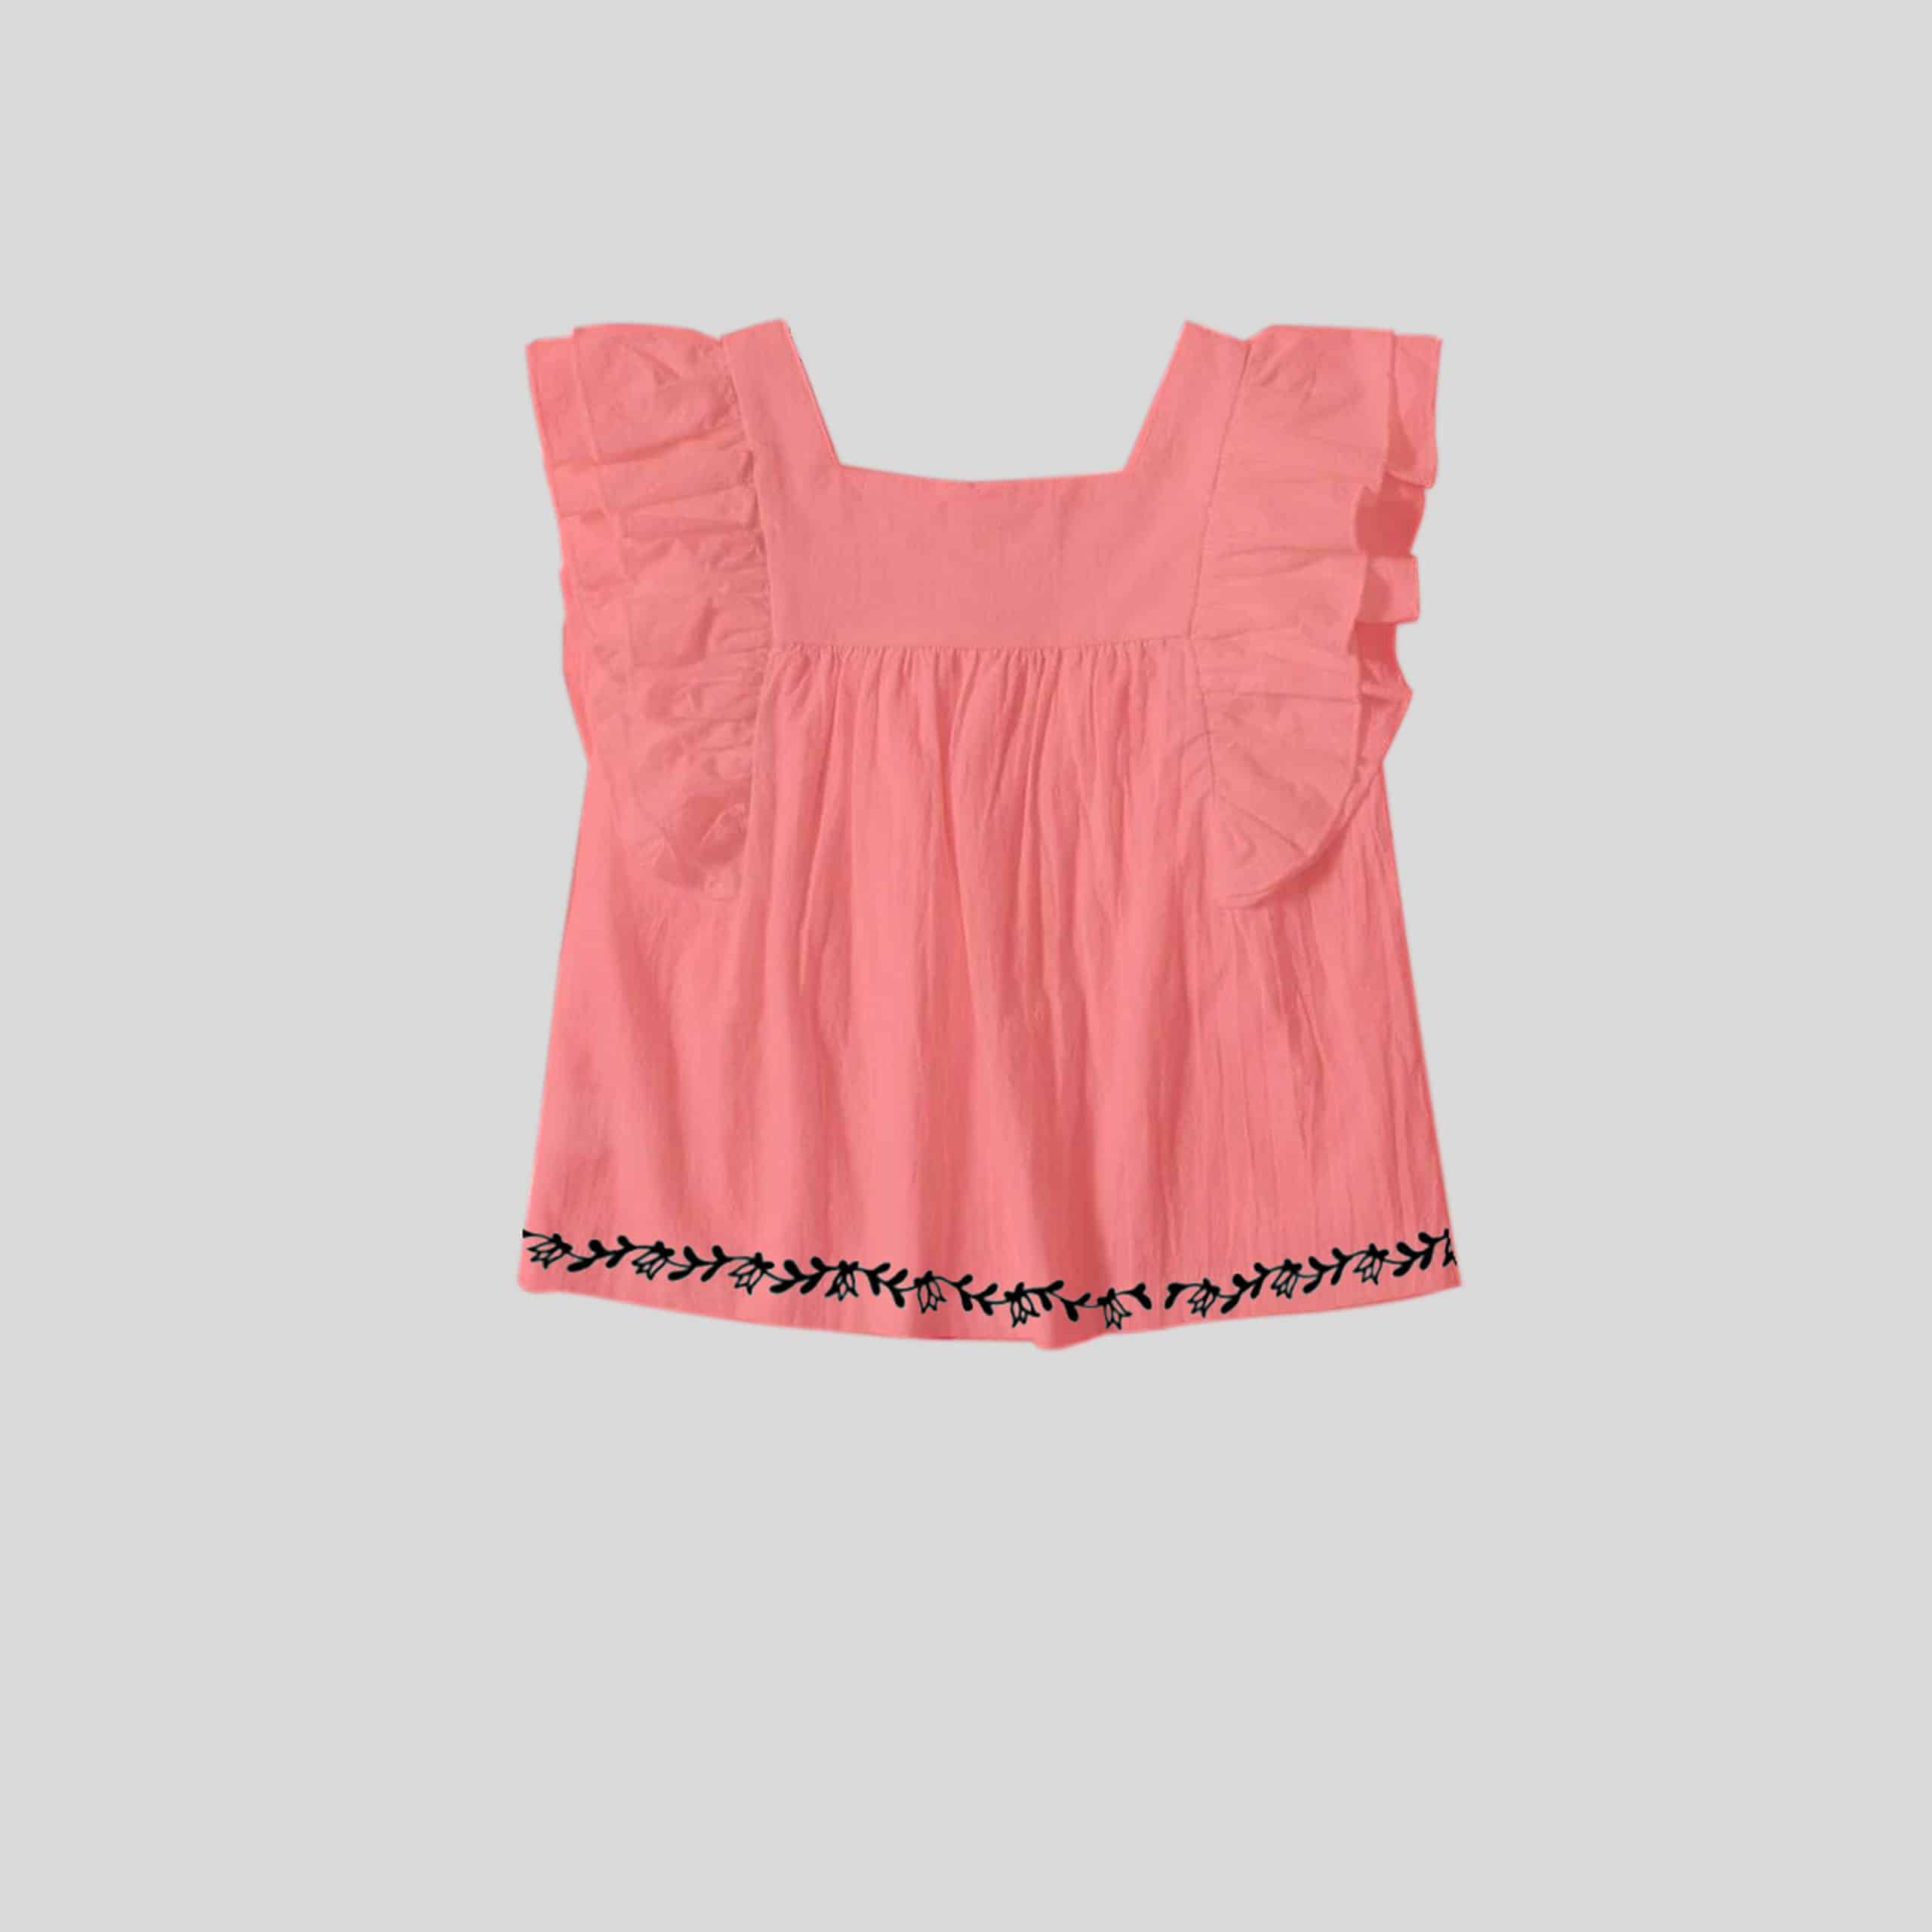 Girls Pink Frill Top with Cute Print - RKFCW324